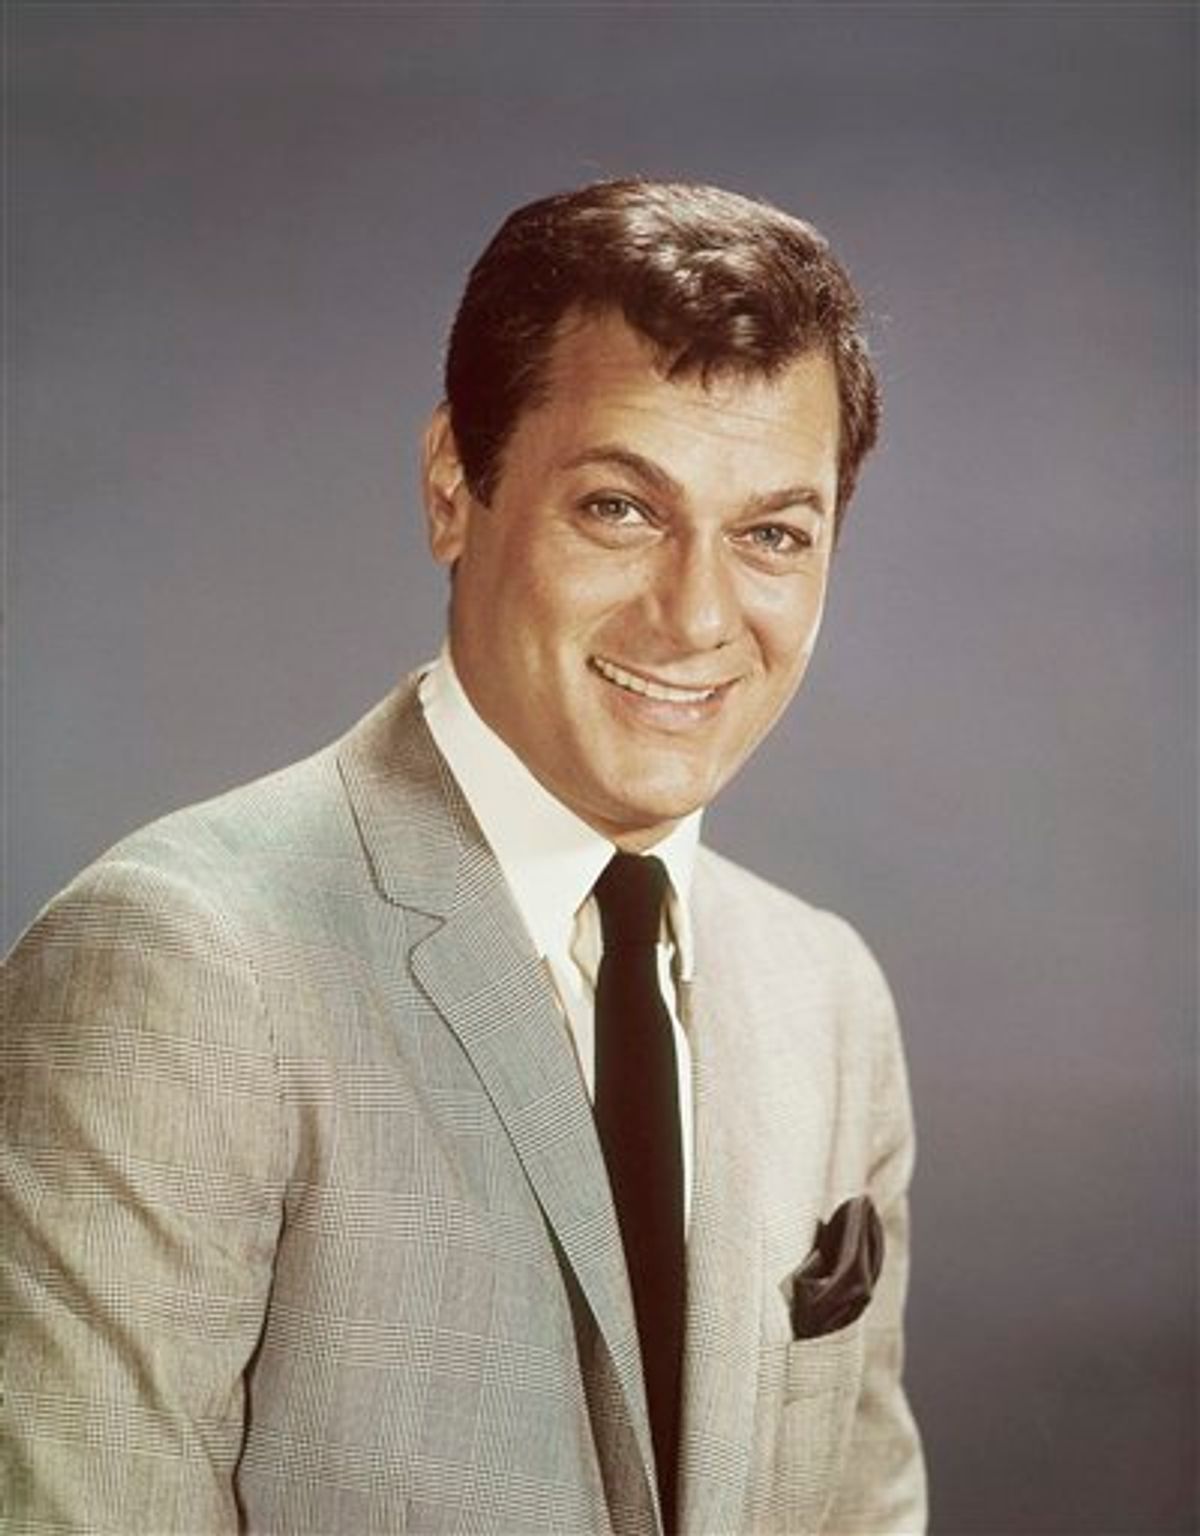 FILE - Actor Tony Curtis is shown in this 1965 file photo. Curtis, whose real name was Bernard Schwartz, was perhaps most known for his comedic turn in Billy Wilder's 'Some Like It Hot' with co-stars Marilyn Monroe and Jack Lemmon has died at 85 according to the Clark County, Nev. coroner. (AP Photo, File)  (AP)